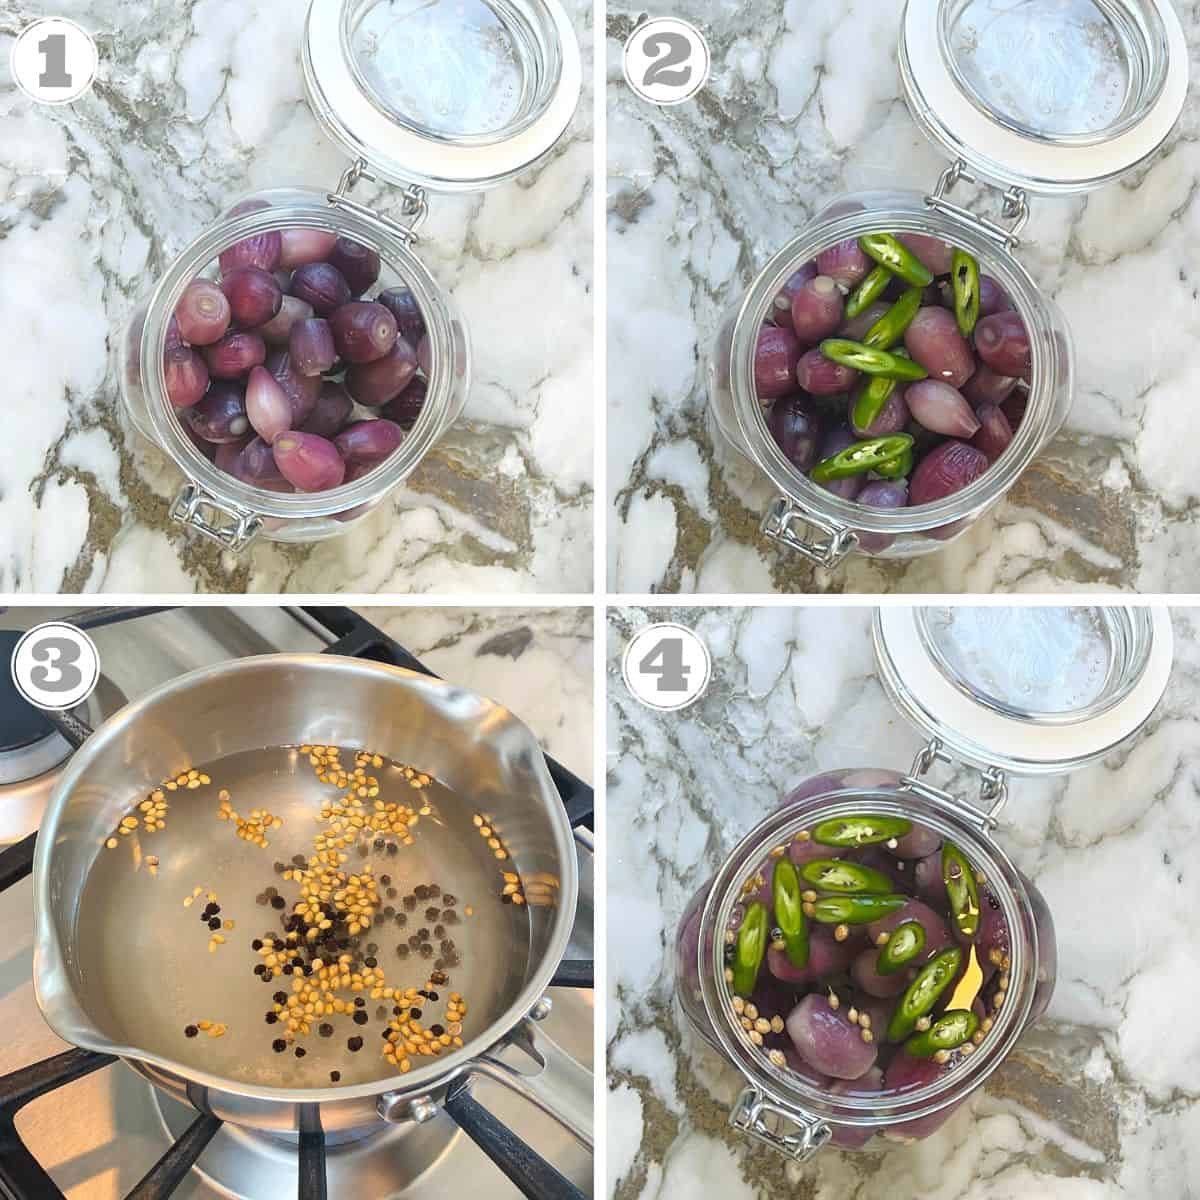 photos one though four showing how to make pickled pearl onions